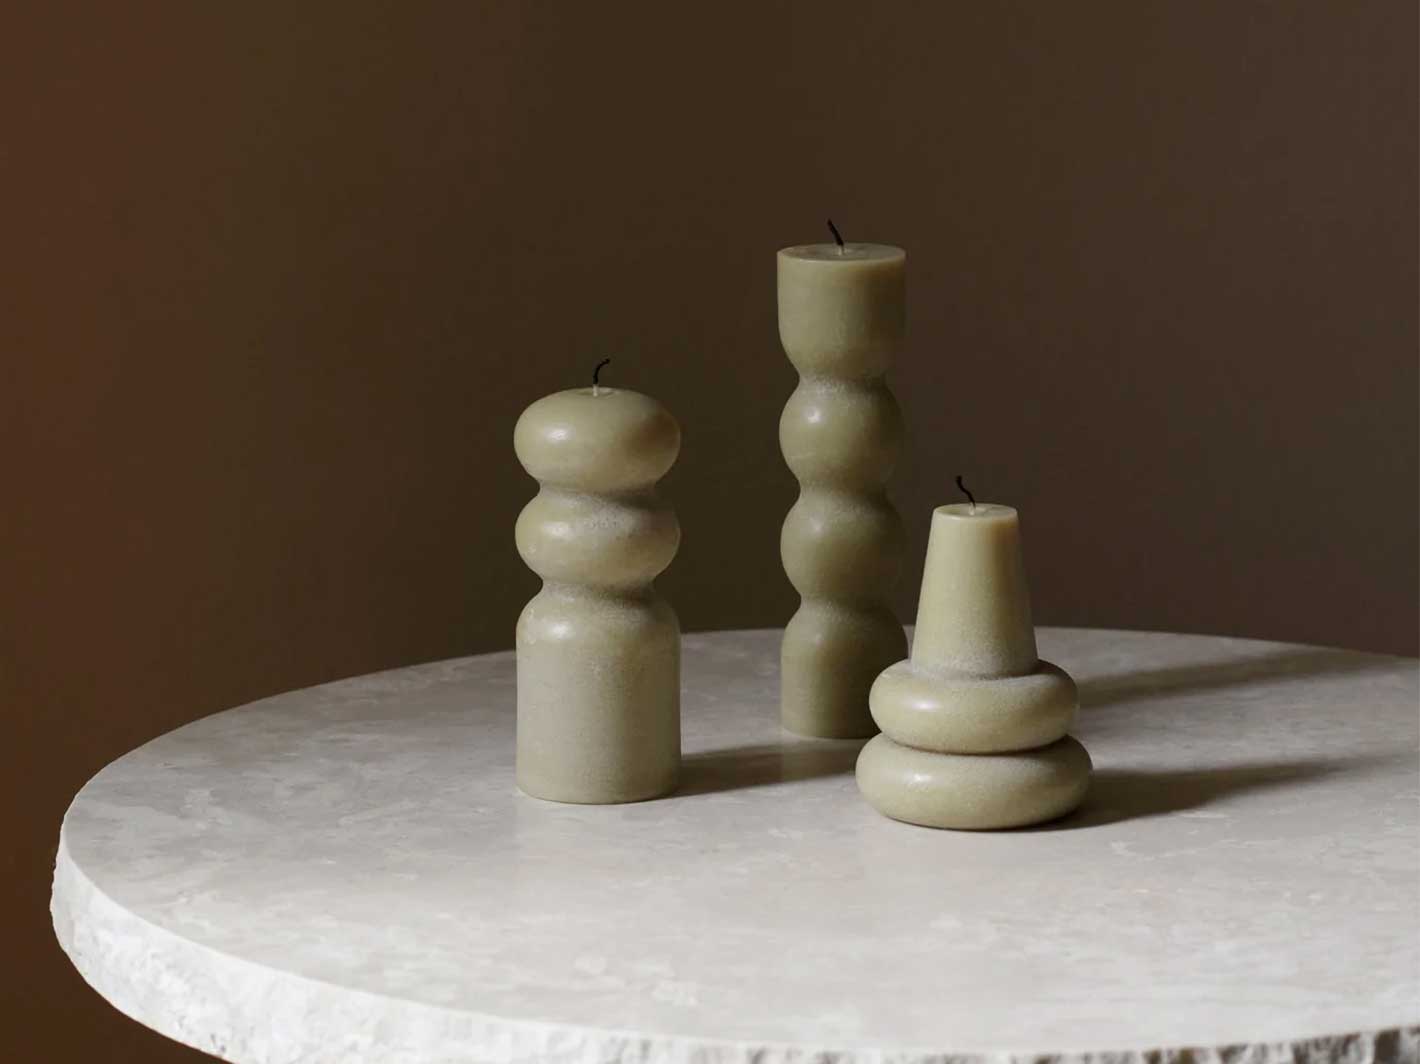 Torno Candles - Set of 3